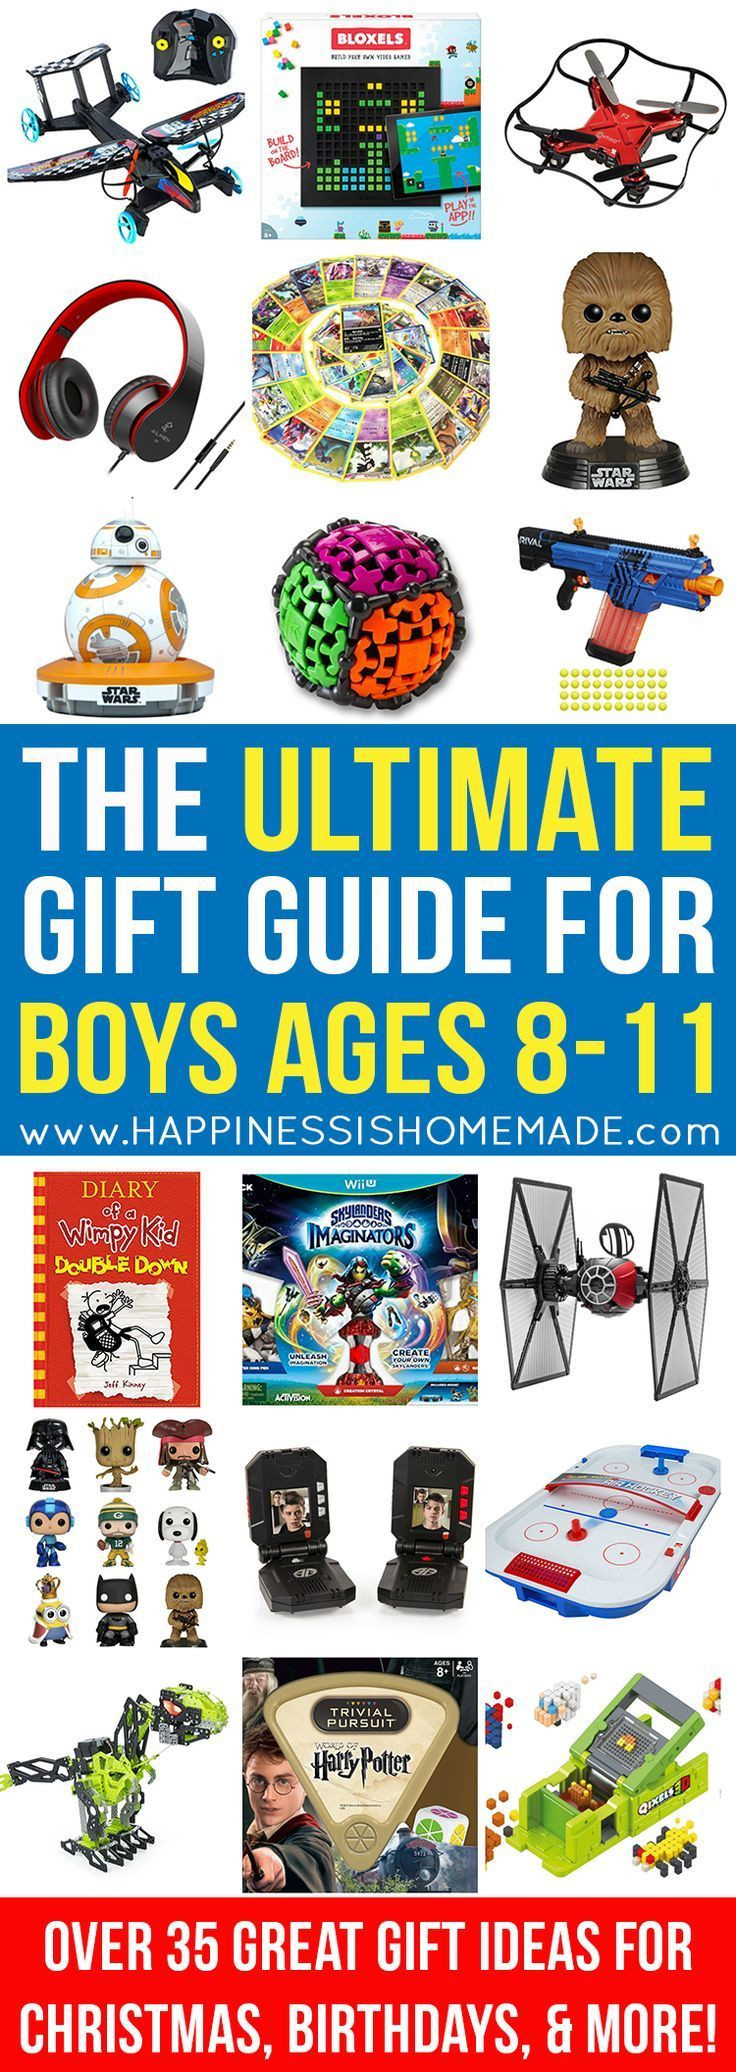 Gift Ideas For Boys 10
 The Best Gift Ideas for Boys Ages 8 11 Looking for t